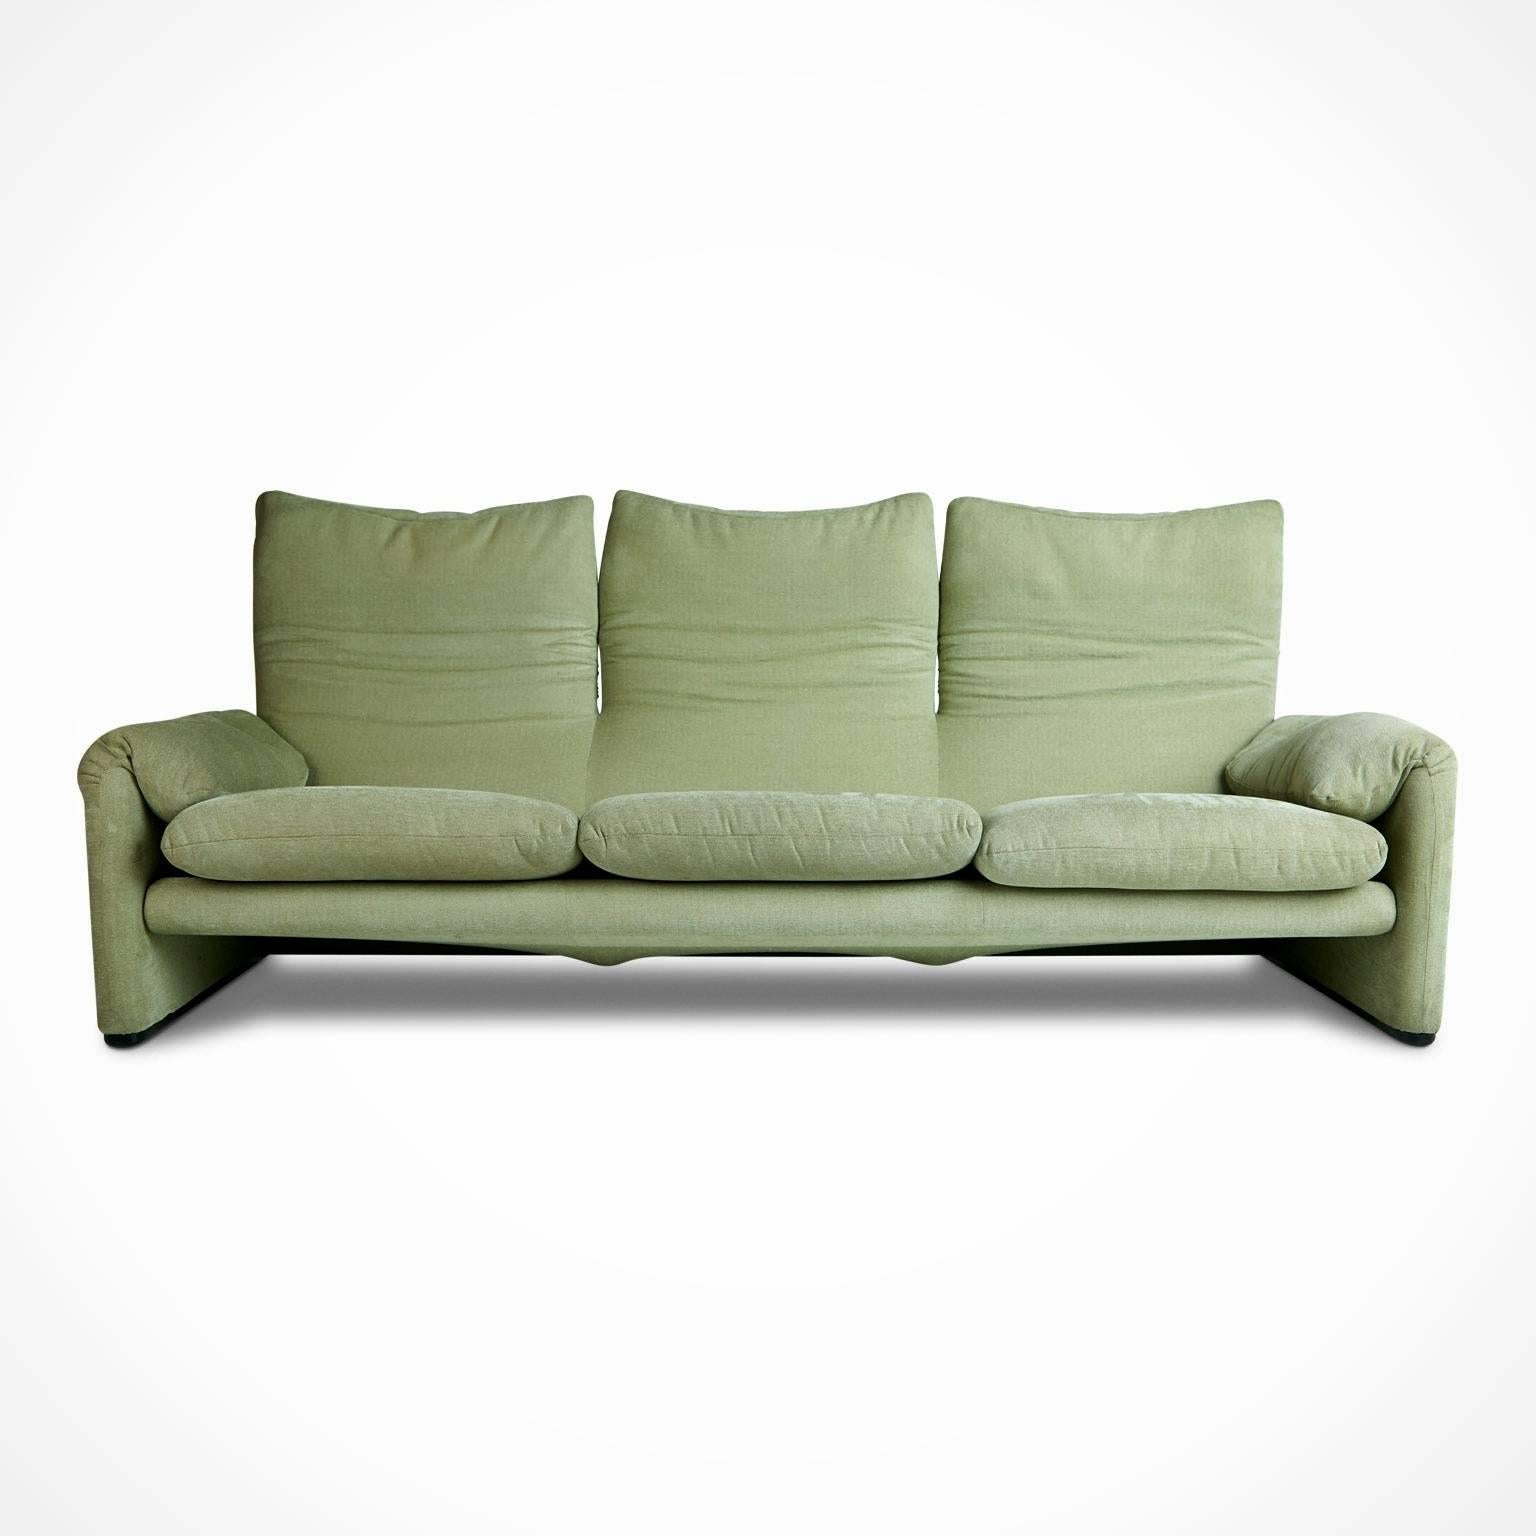 Vico Magistretti's award-winning 1973 Maralunga sofa for Cassina. The sofa provides a comfortable deep seat with low armrests and has adjustable backrests which, when unfolded, create a high back lounge style. This sofa has been upholstered in a